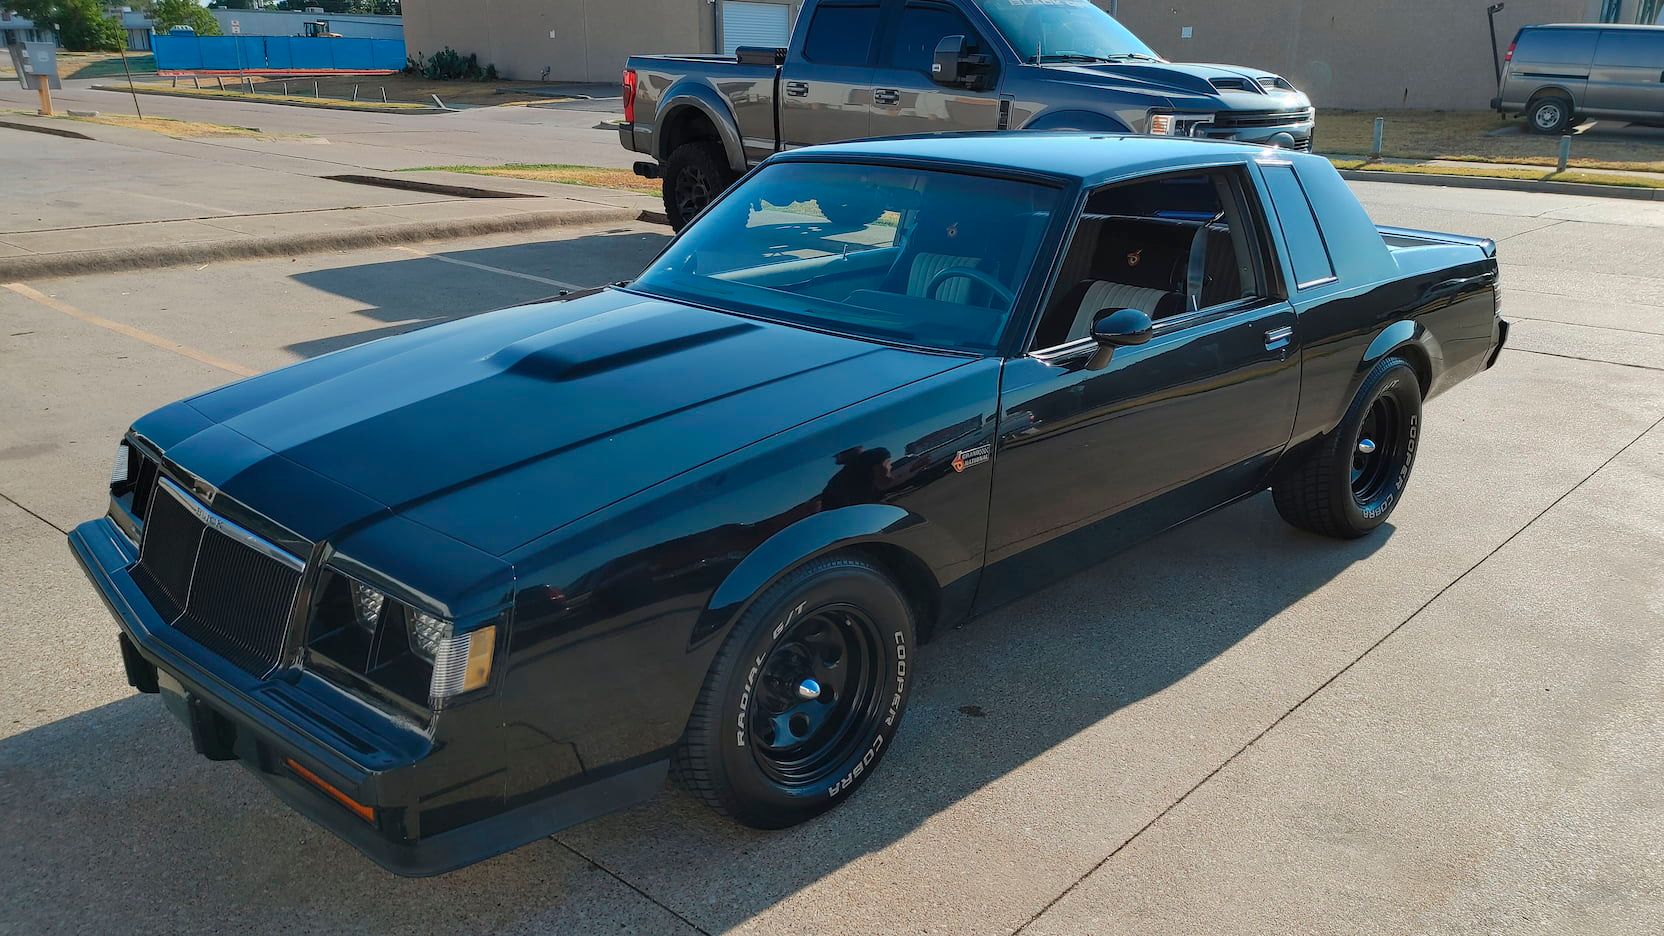 Black 1985 Buick Regal Grand National parked